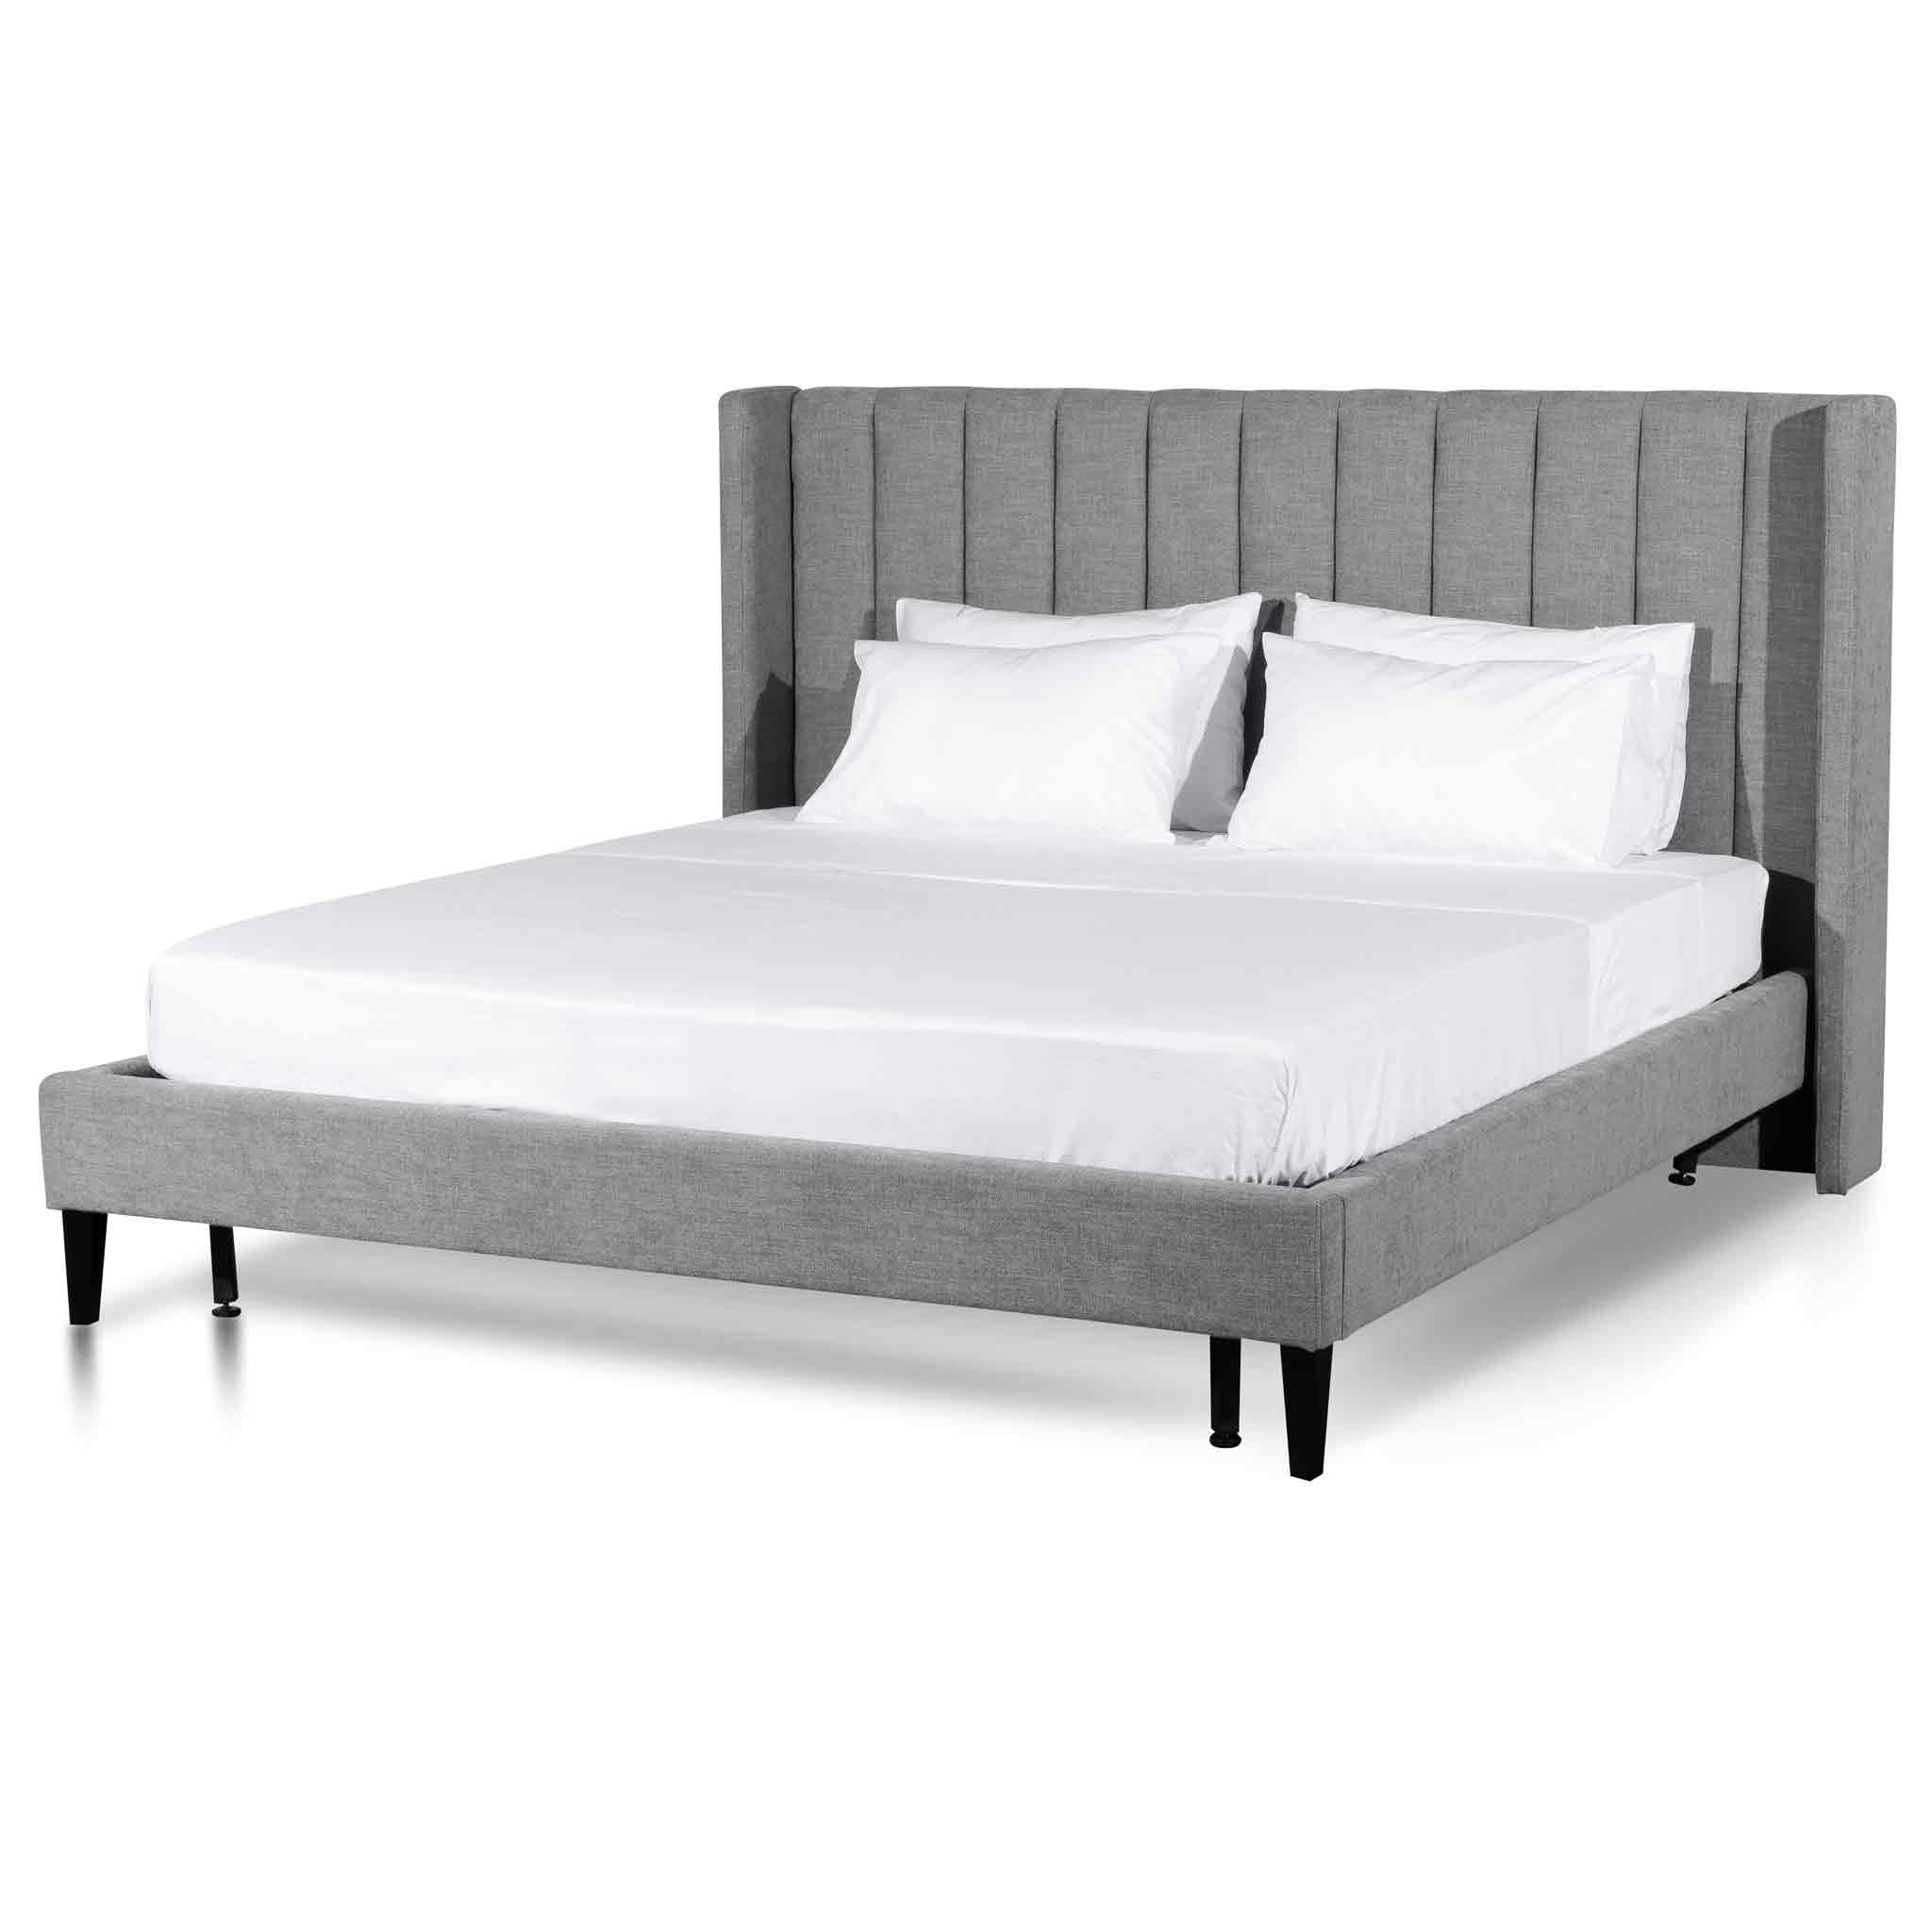 Mark Fabric King Bed Frame - Fossil Grey - Beds